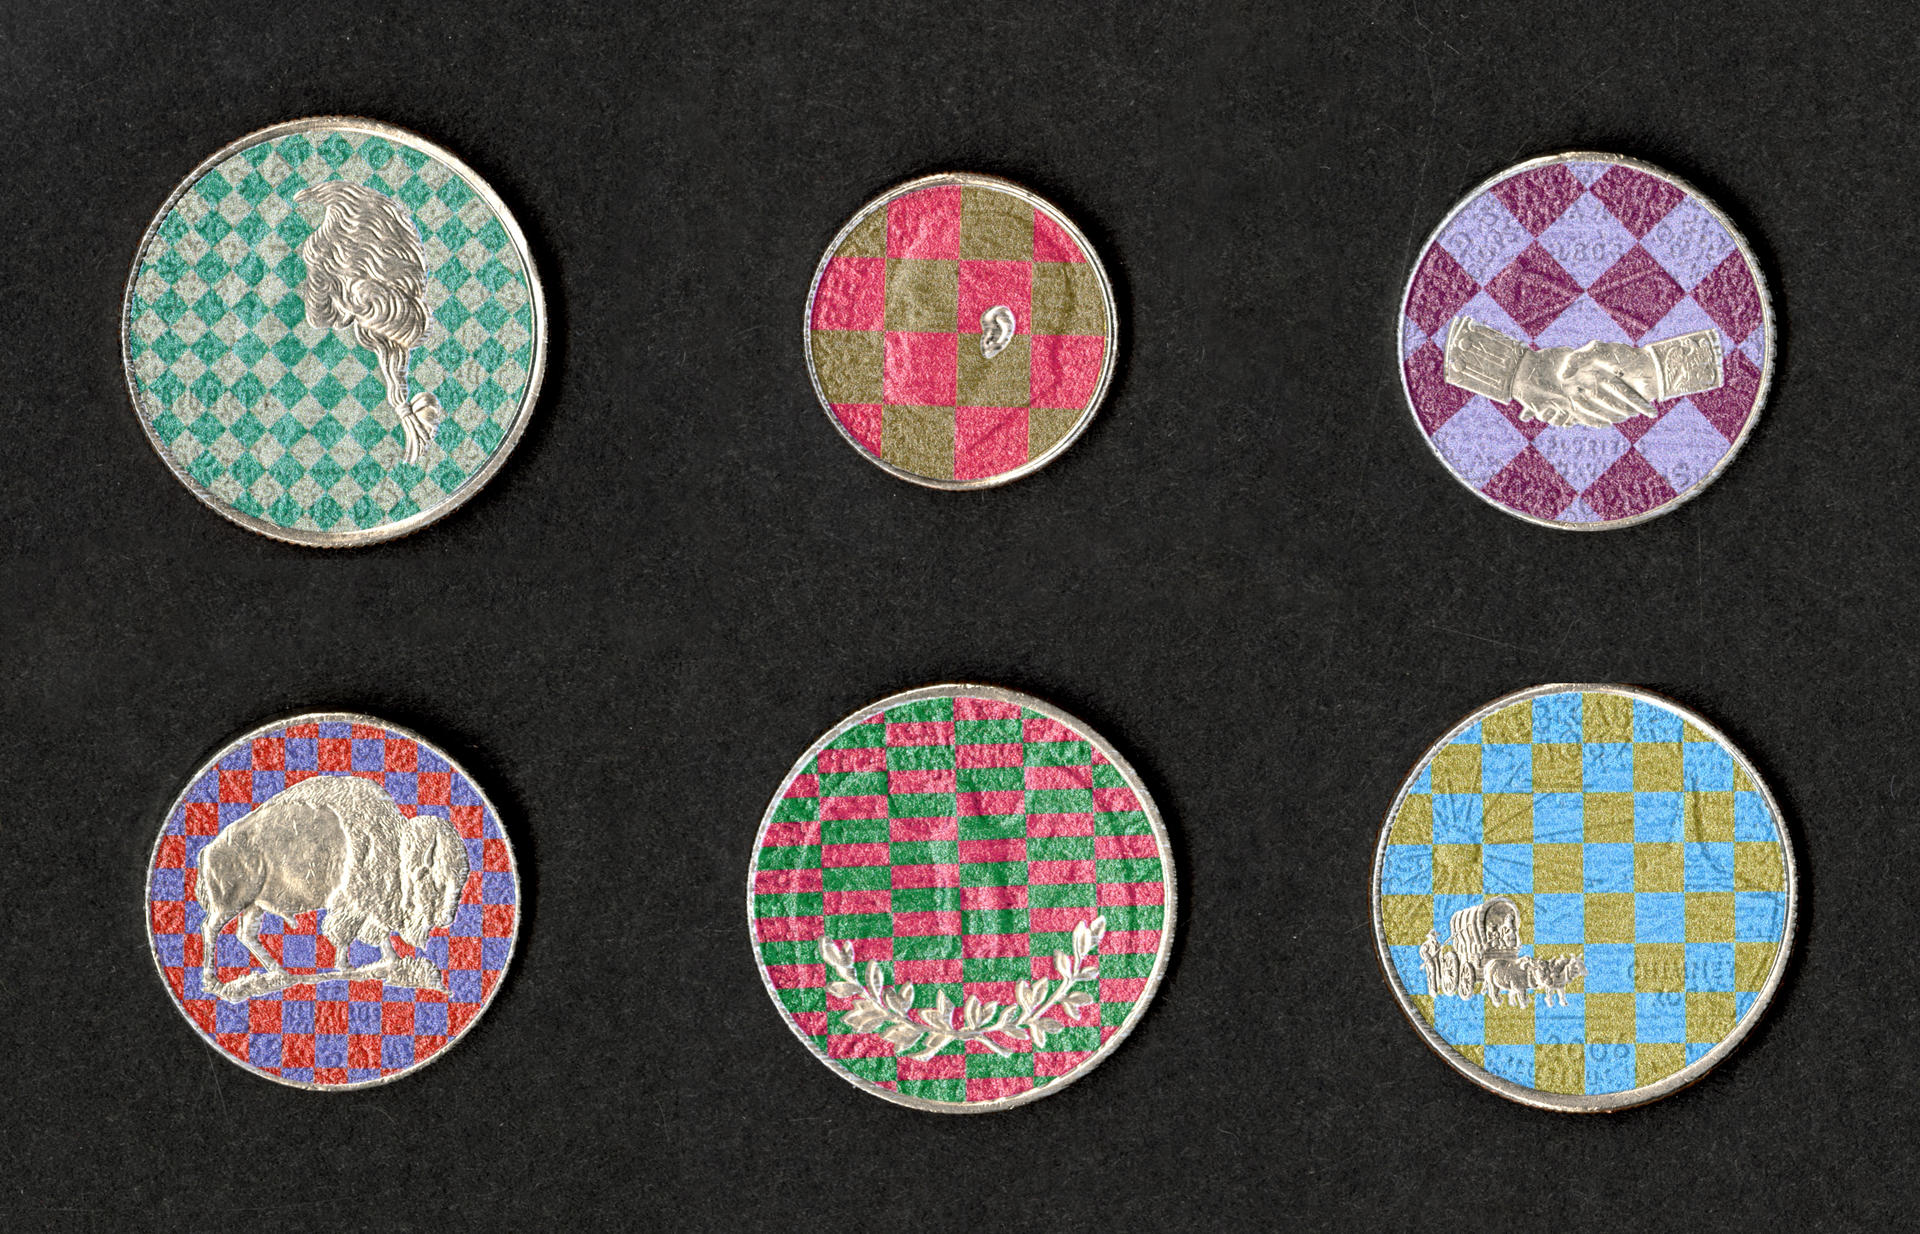 Coins that have checker patterns UV printed on them